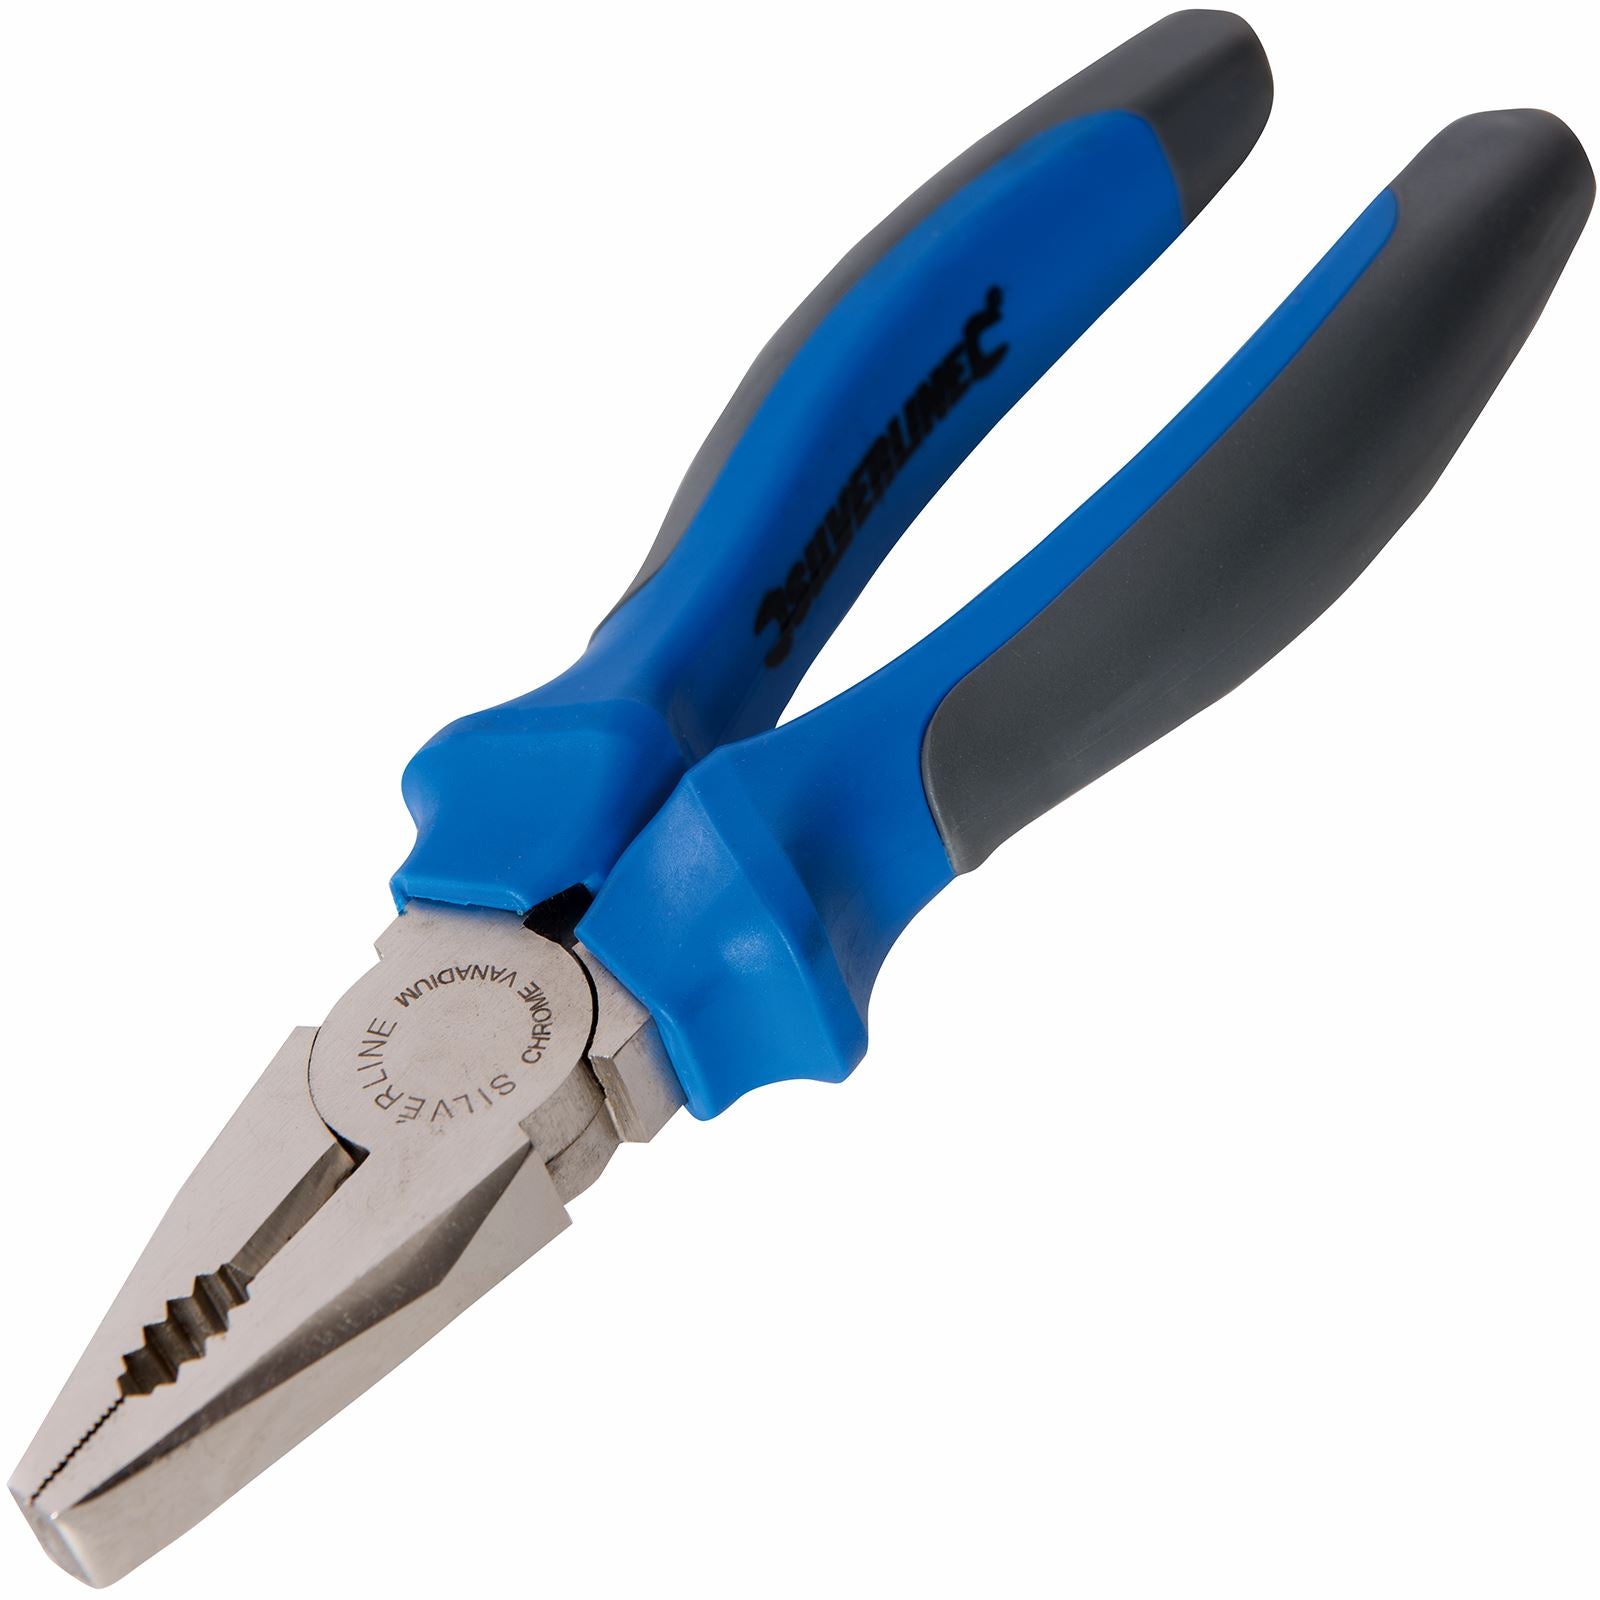 Silverline Expert Combination Pliers 180mm or 200mm